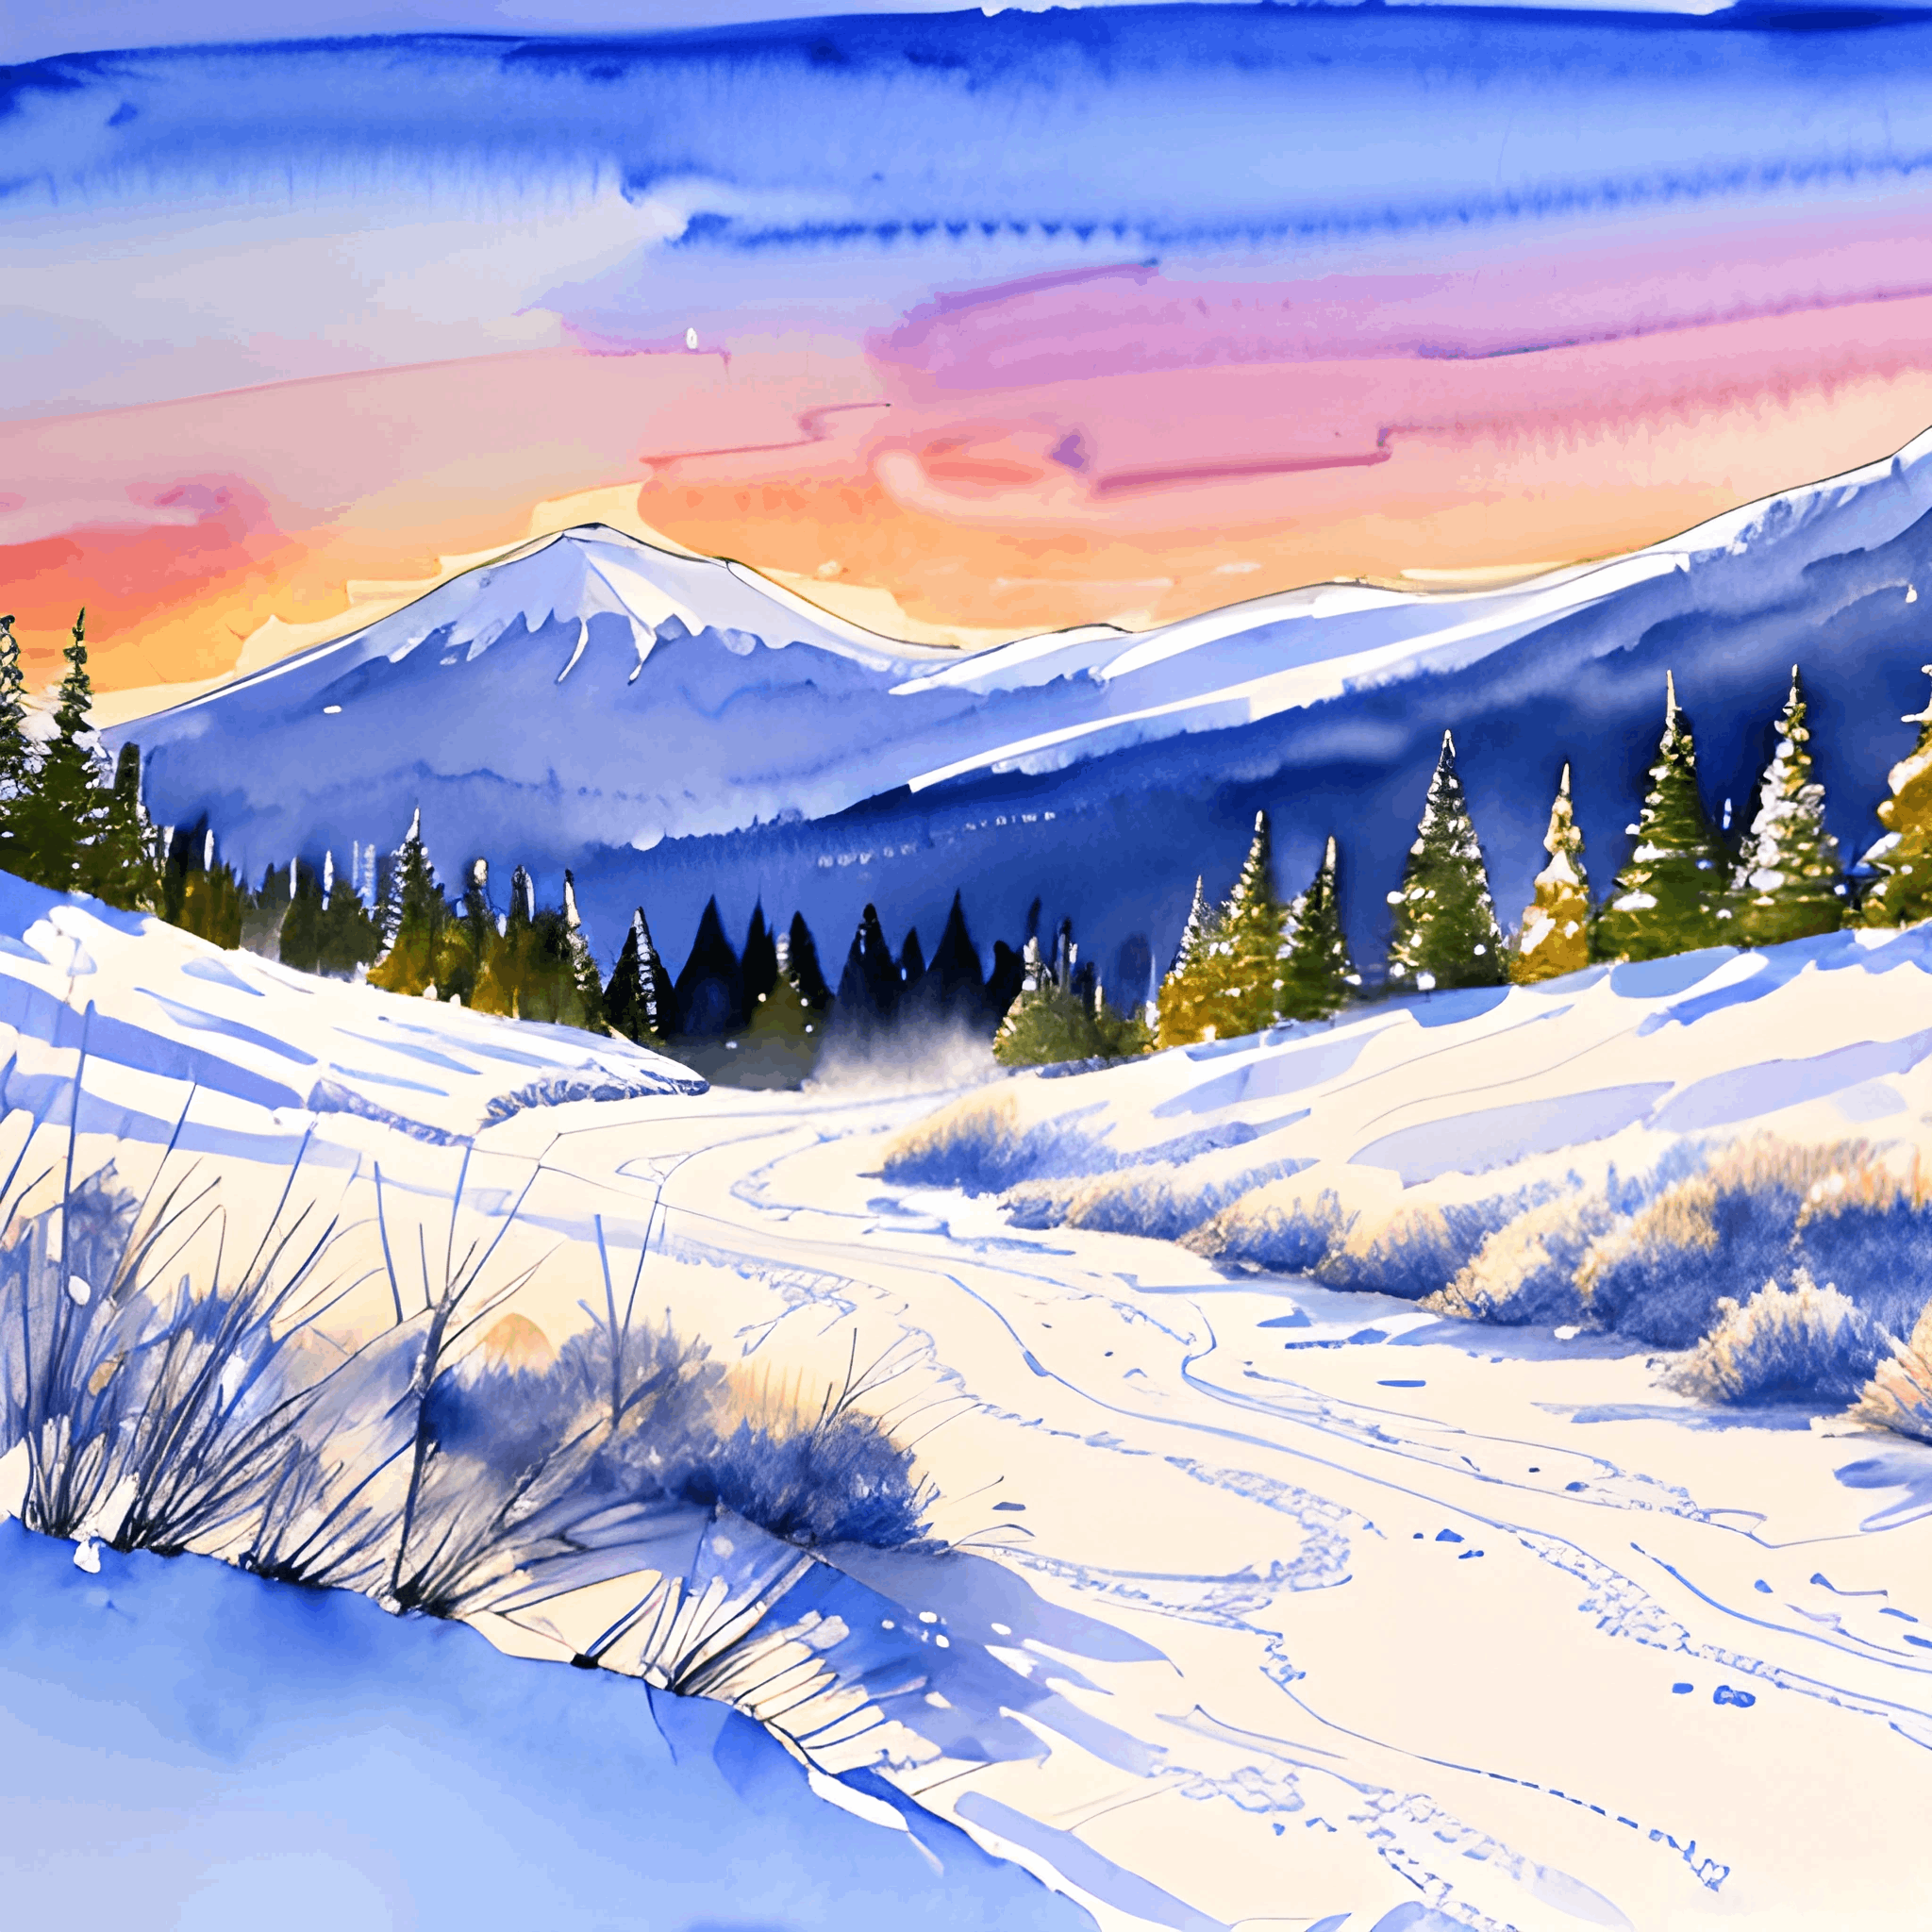 painting of a snowy mountain scene with a trail in the foreground